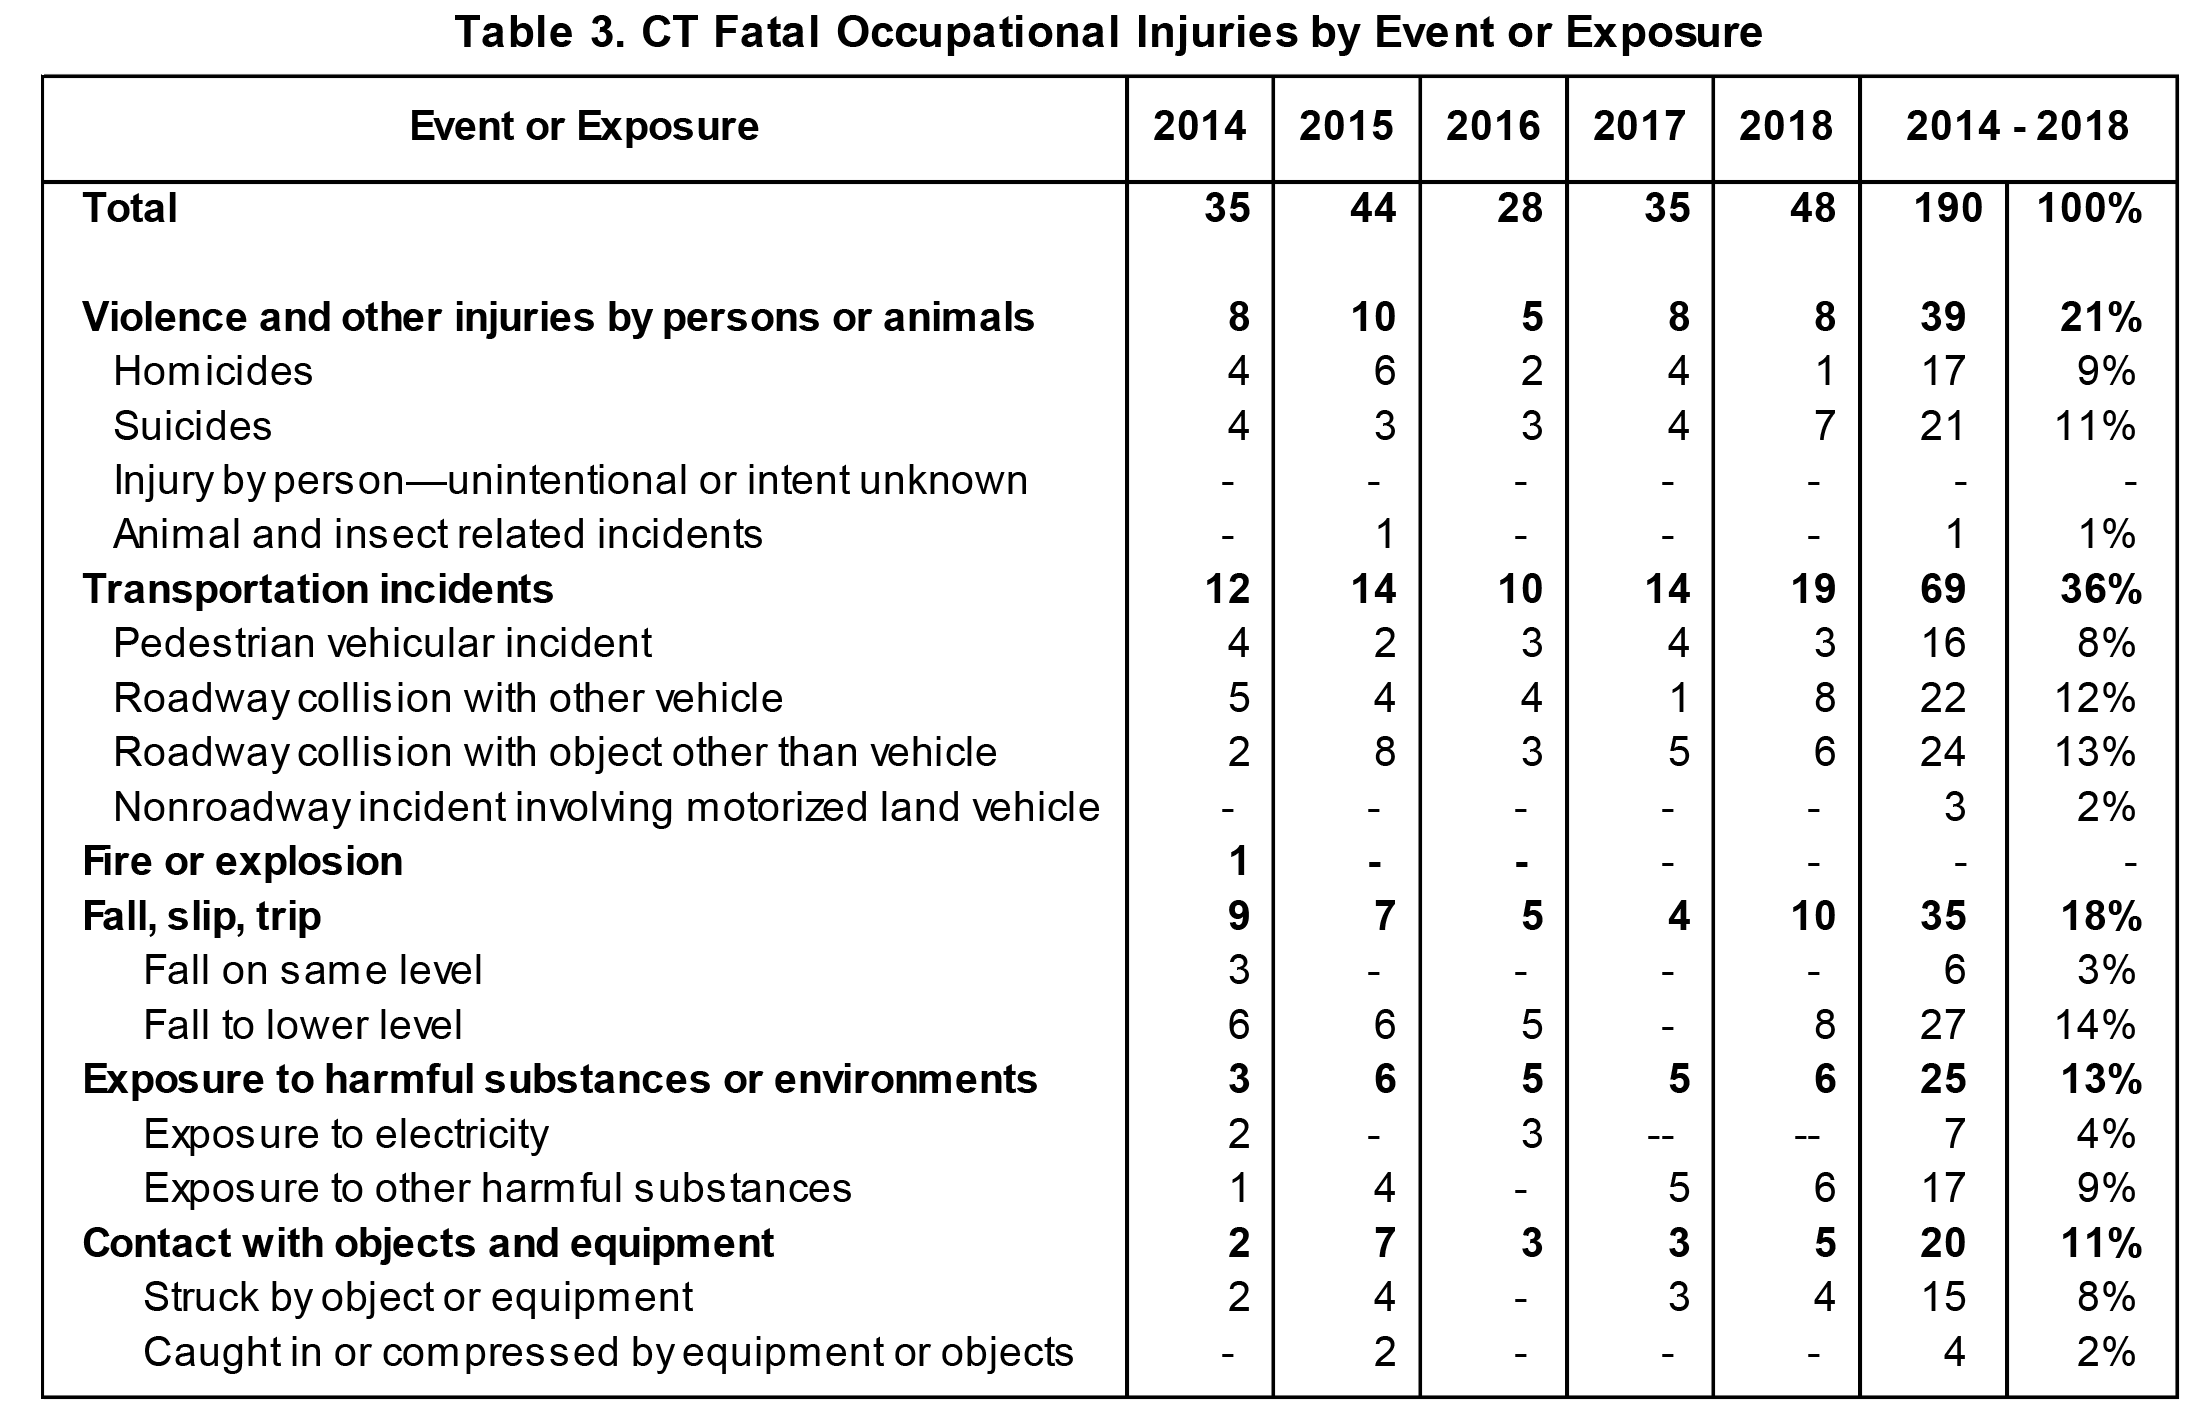 Table 4. CT Fatal Occupational Injuries by Occupation